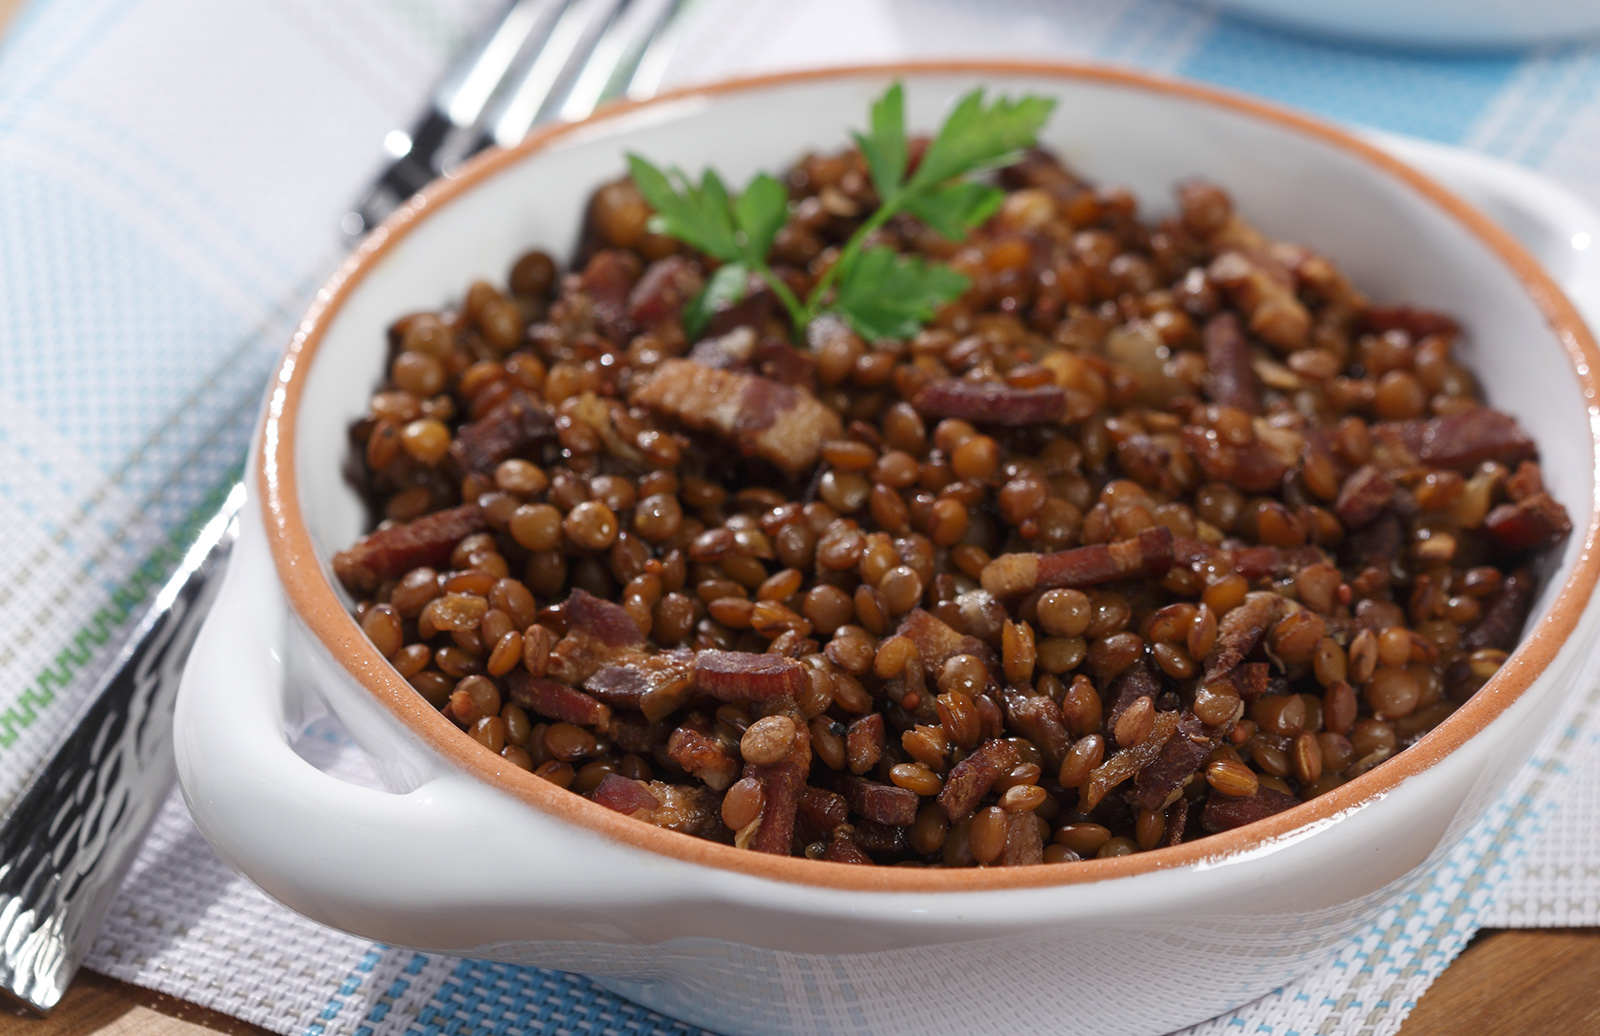 This recipe brings lentils into a baked bean-like recipe along with flavour...